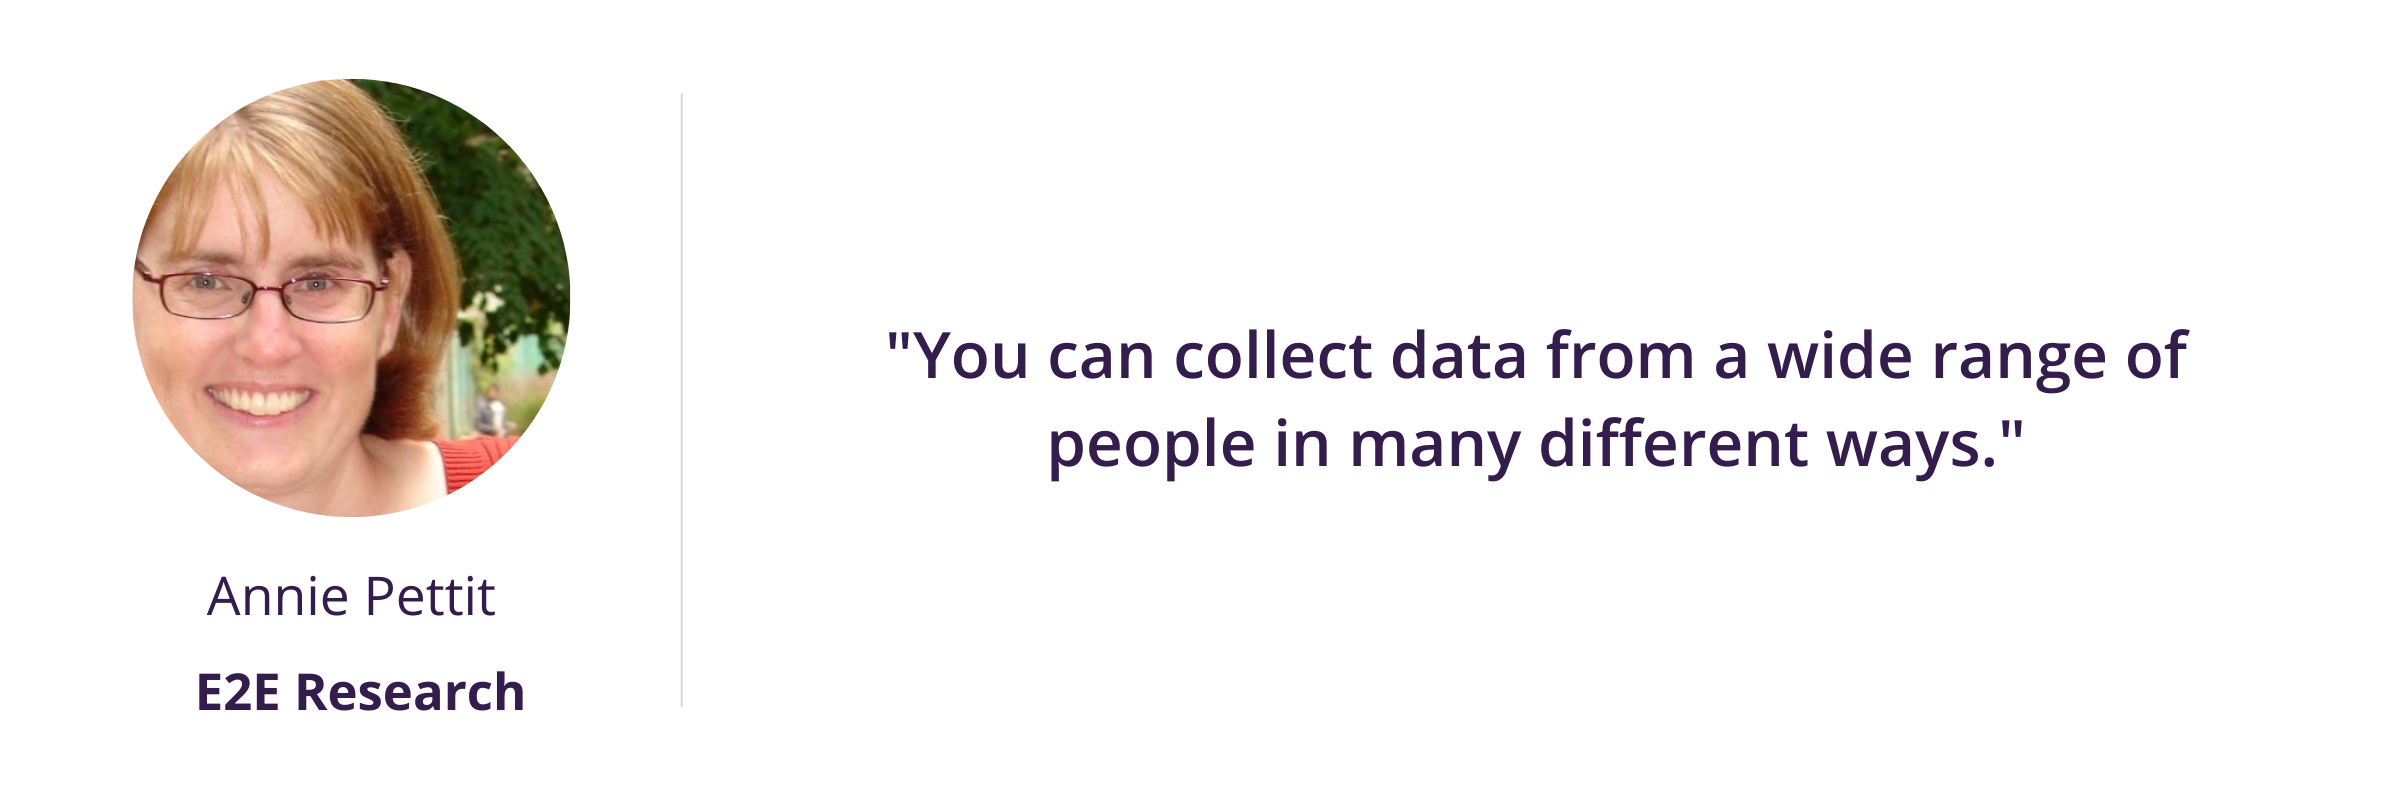 You can collect data from a wide range of people in many different ways. (1)